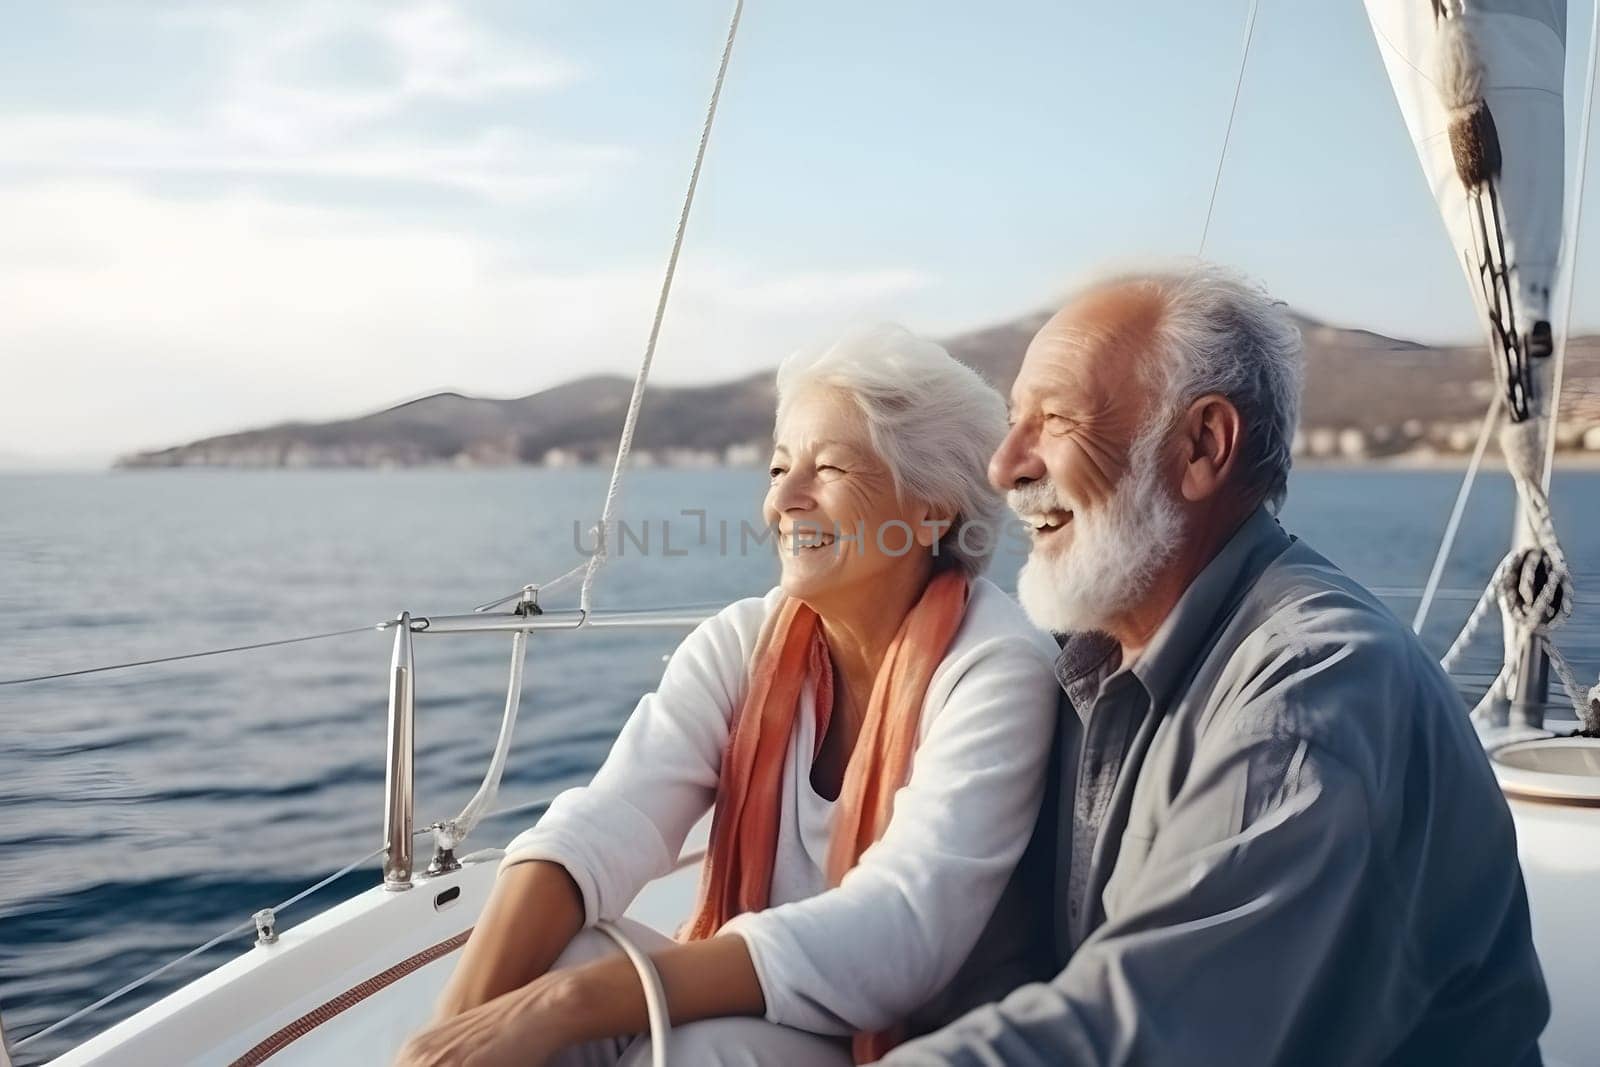 Beautiful and happy senior caucasian couple on a sailboat at sunny day, neural network generated image by z1b